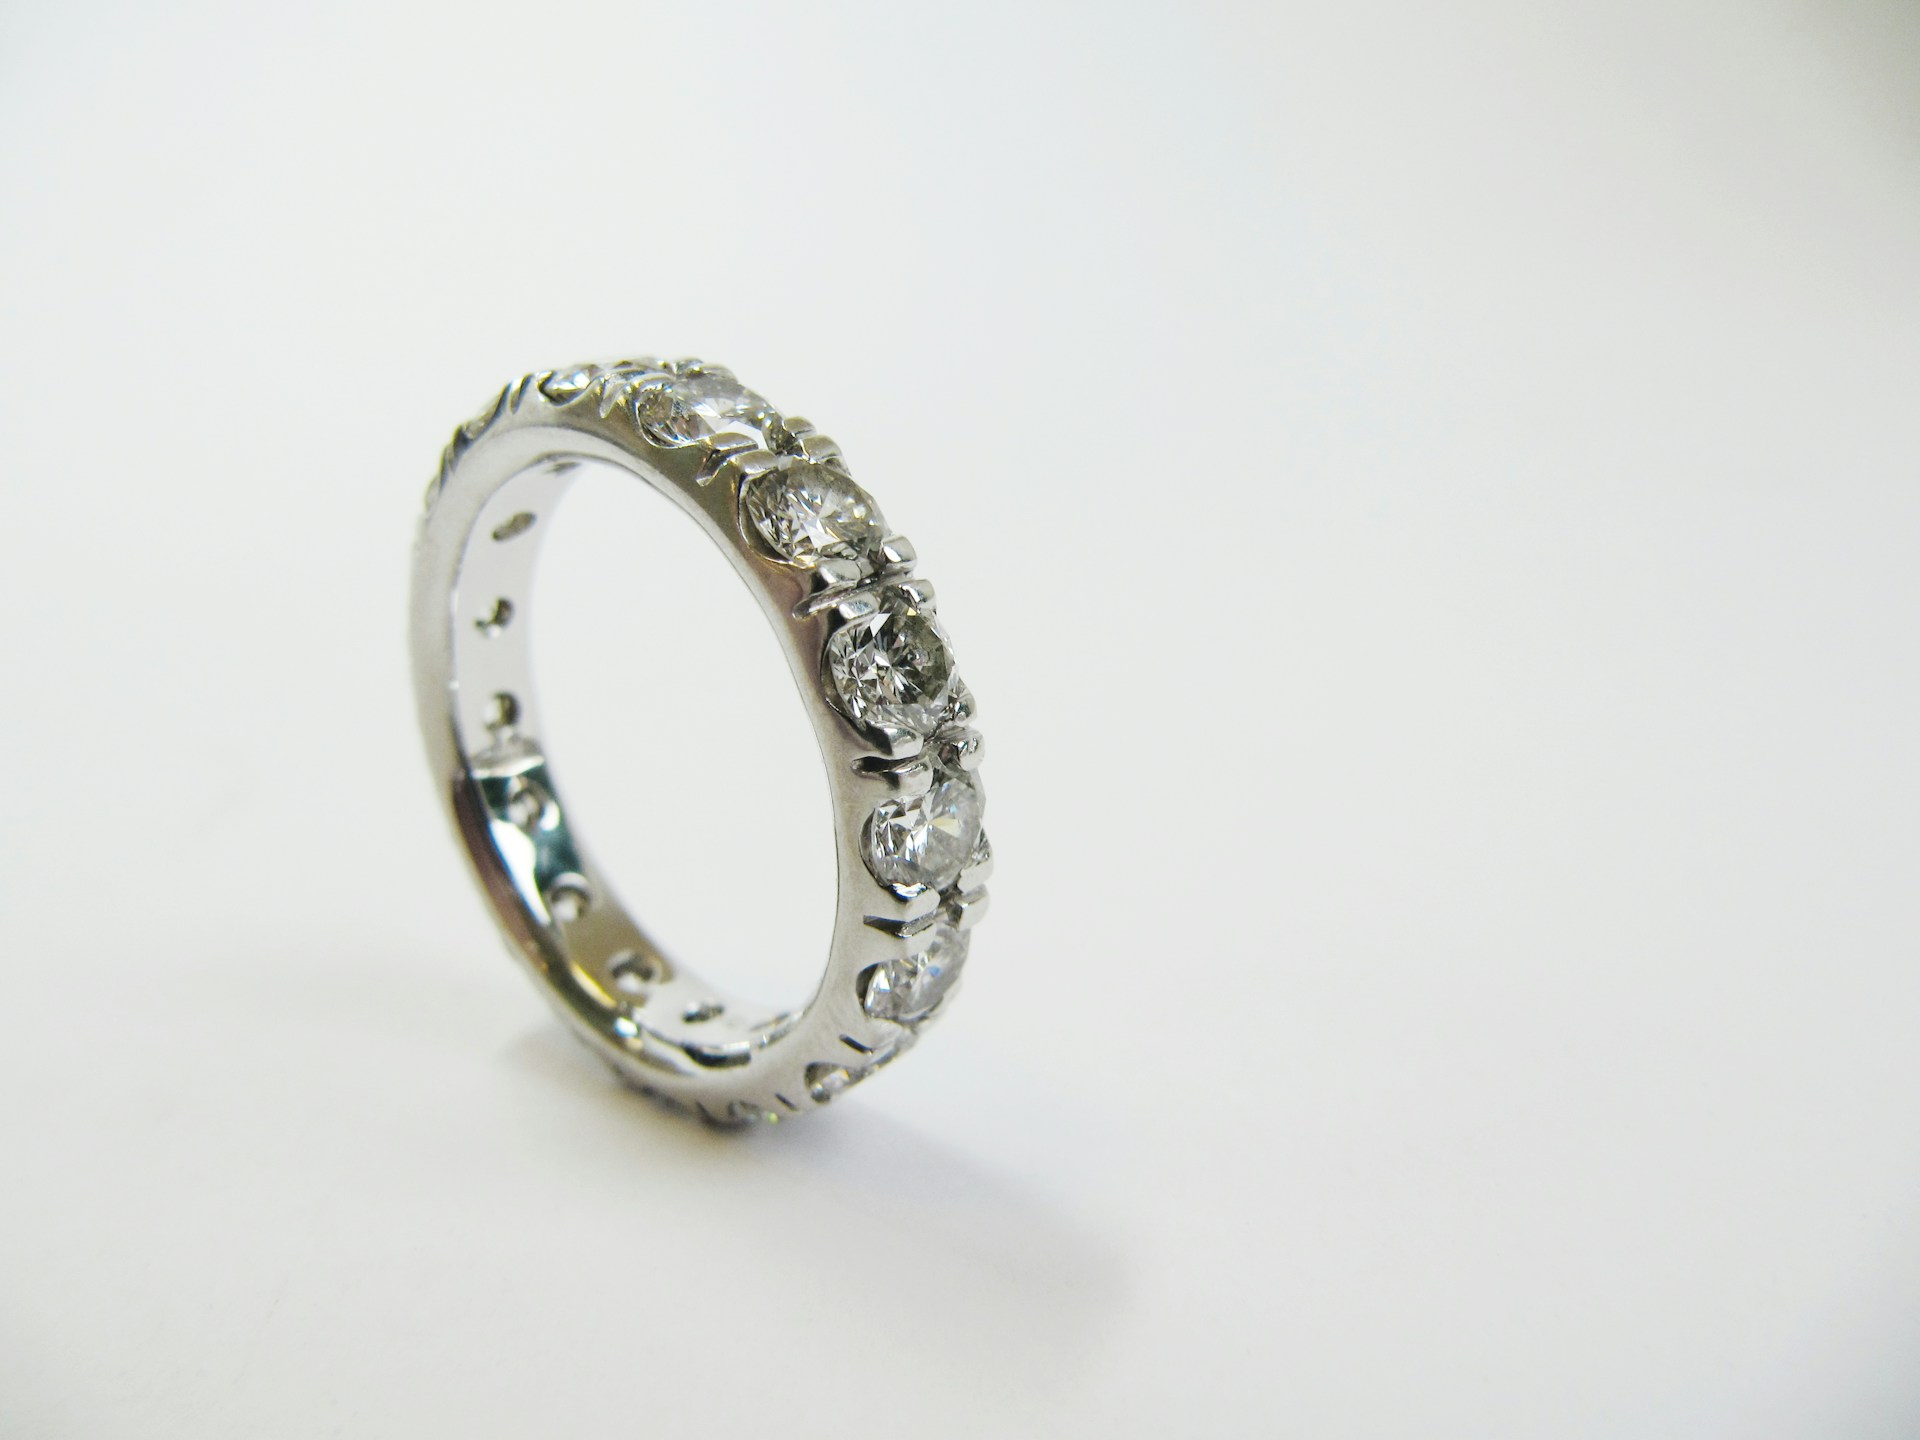 A platinum diamond wedding band stands on a white background.